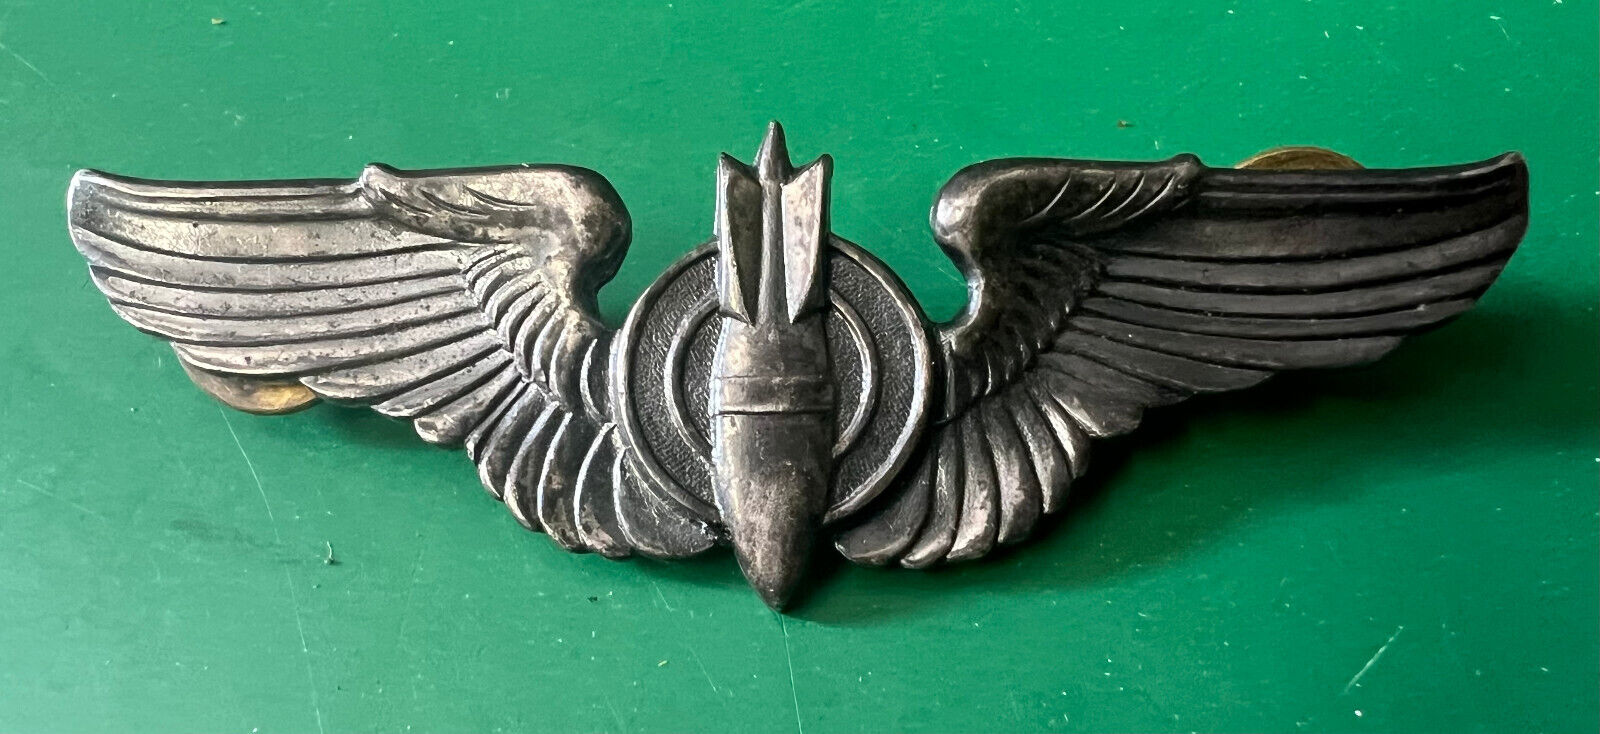 USAAF BOMBARDIER’S STERLING SILVER 3 INCH WINGS